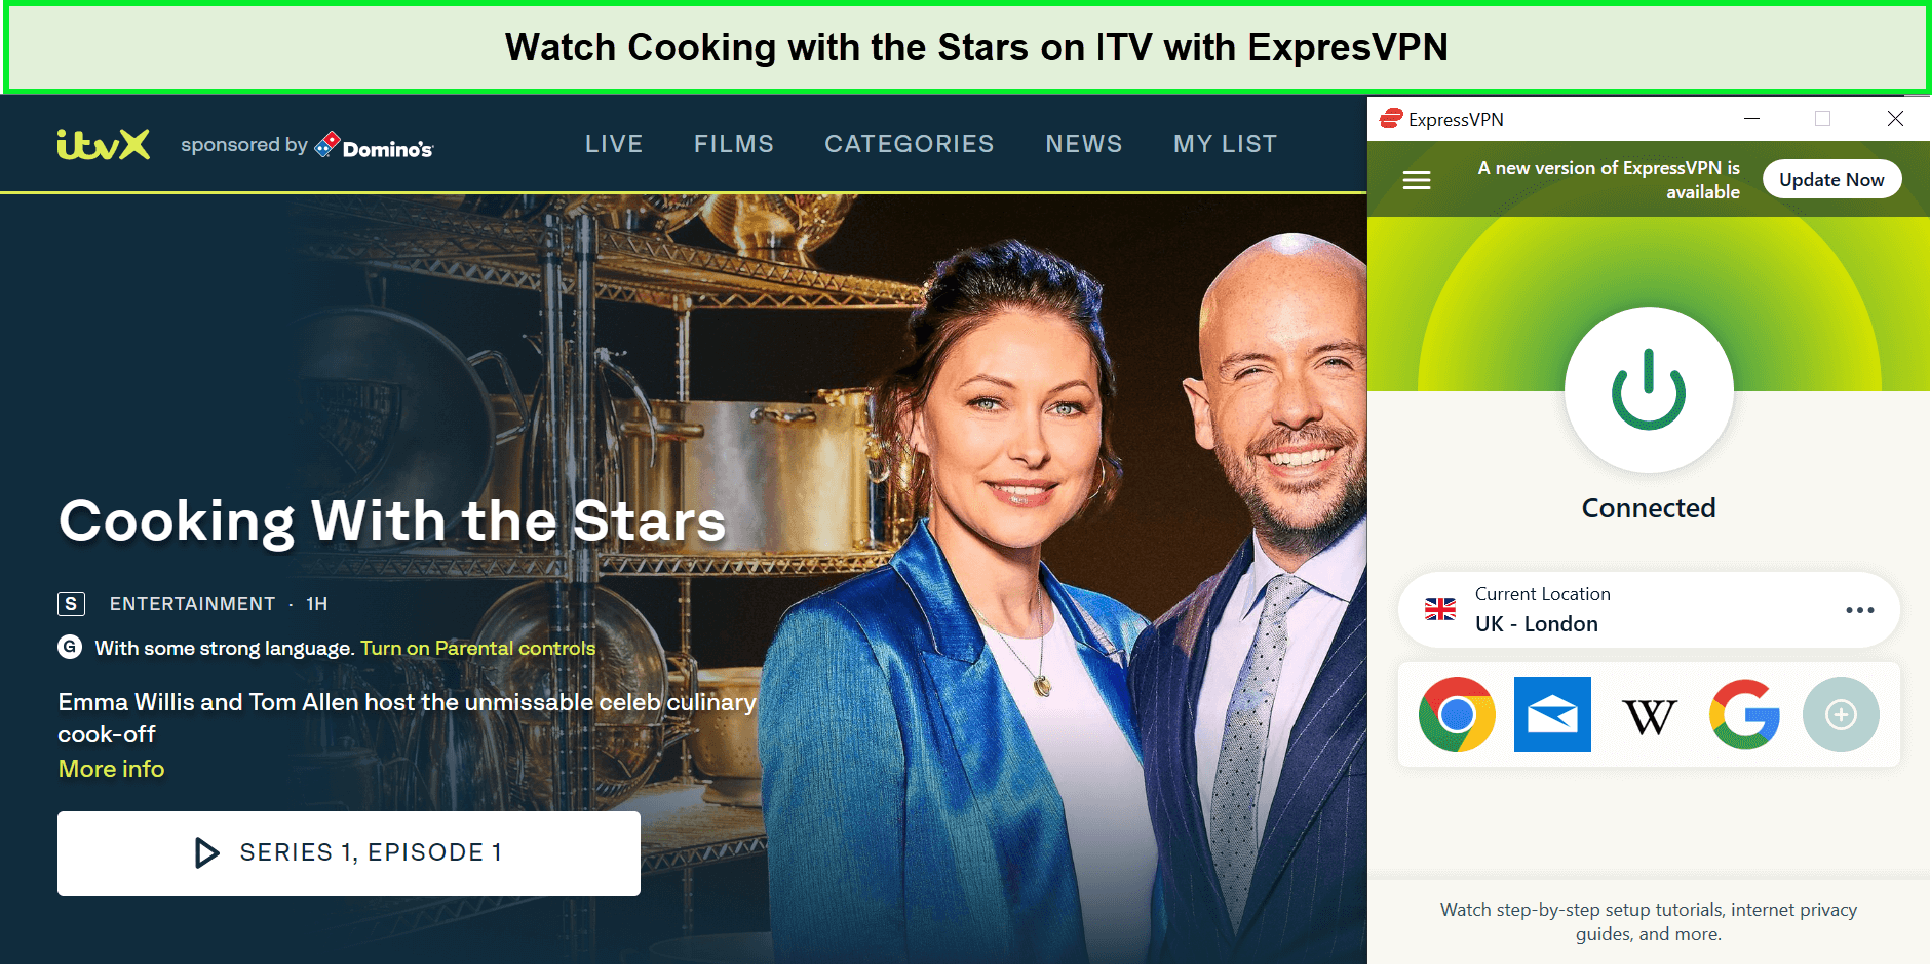 Watch-Cooking-with-the-Stars-Season-3-in-Canada-on-ITV-with-ExpresVPN